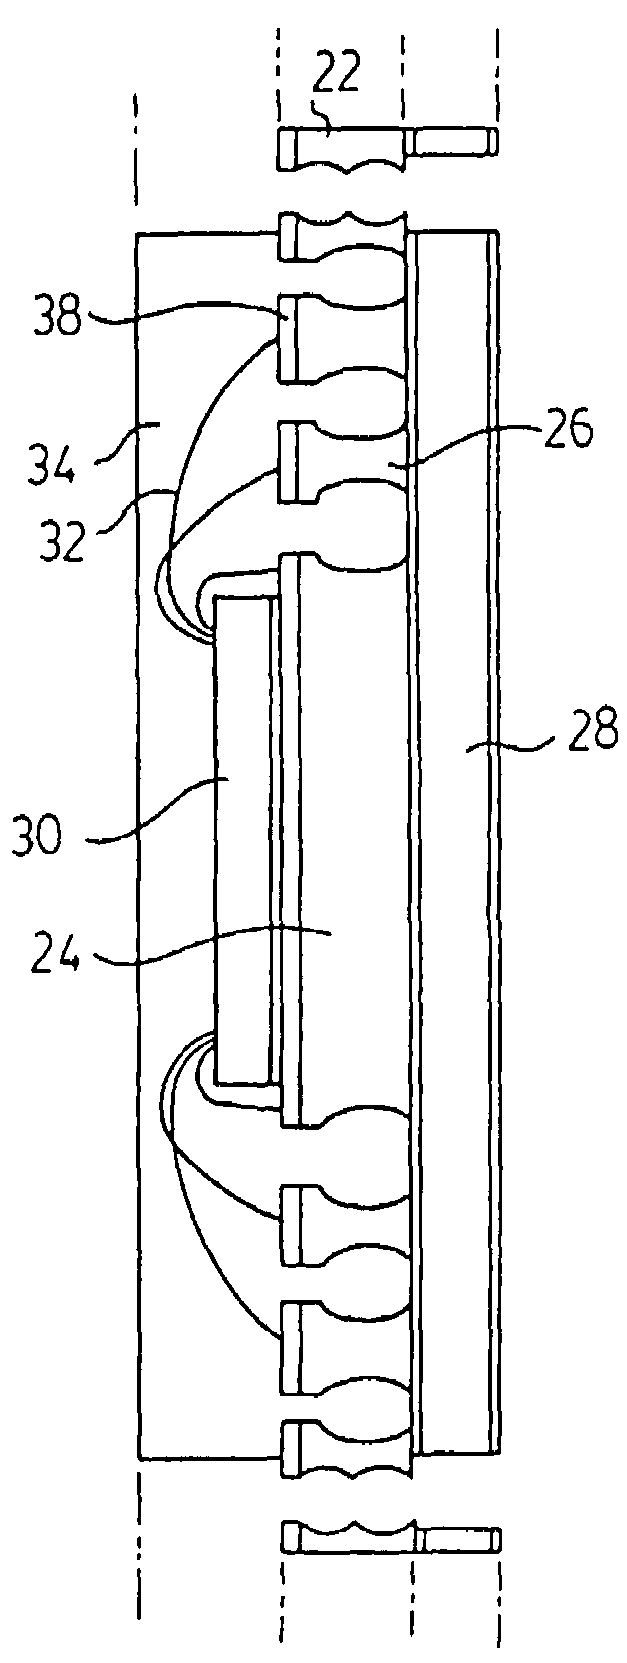 Process for fabricating an integrated circuit package